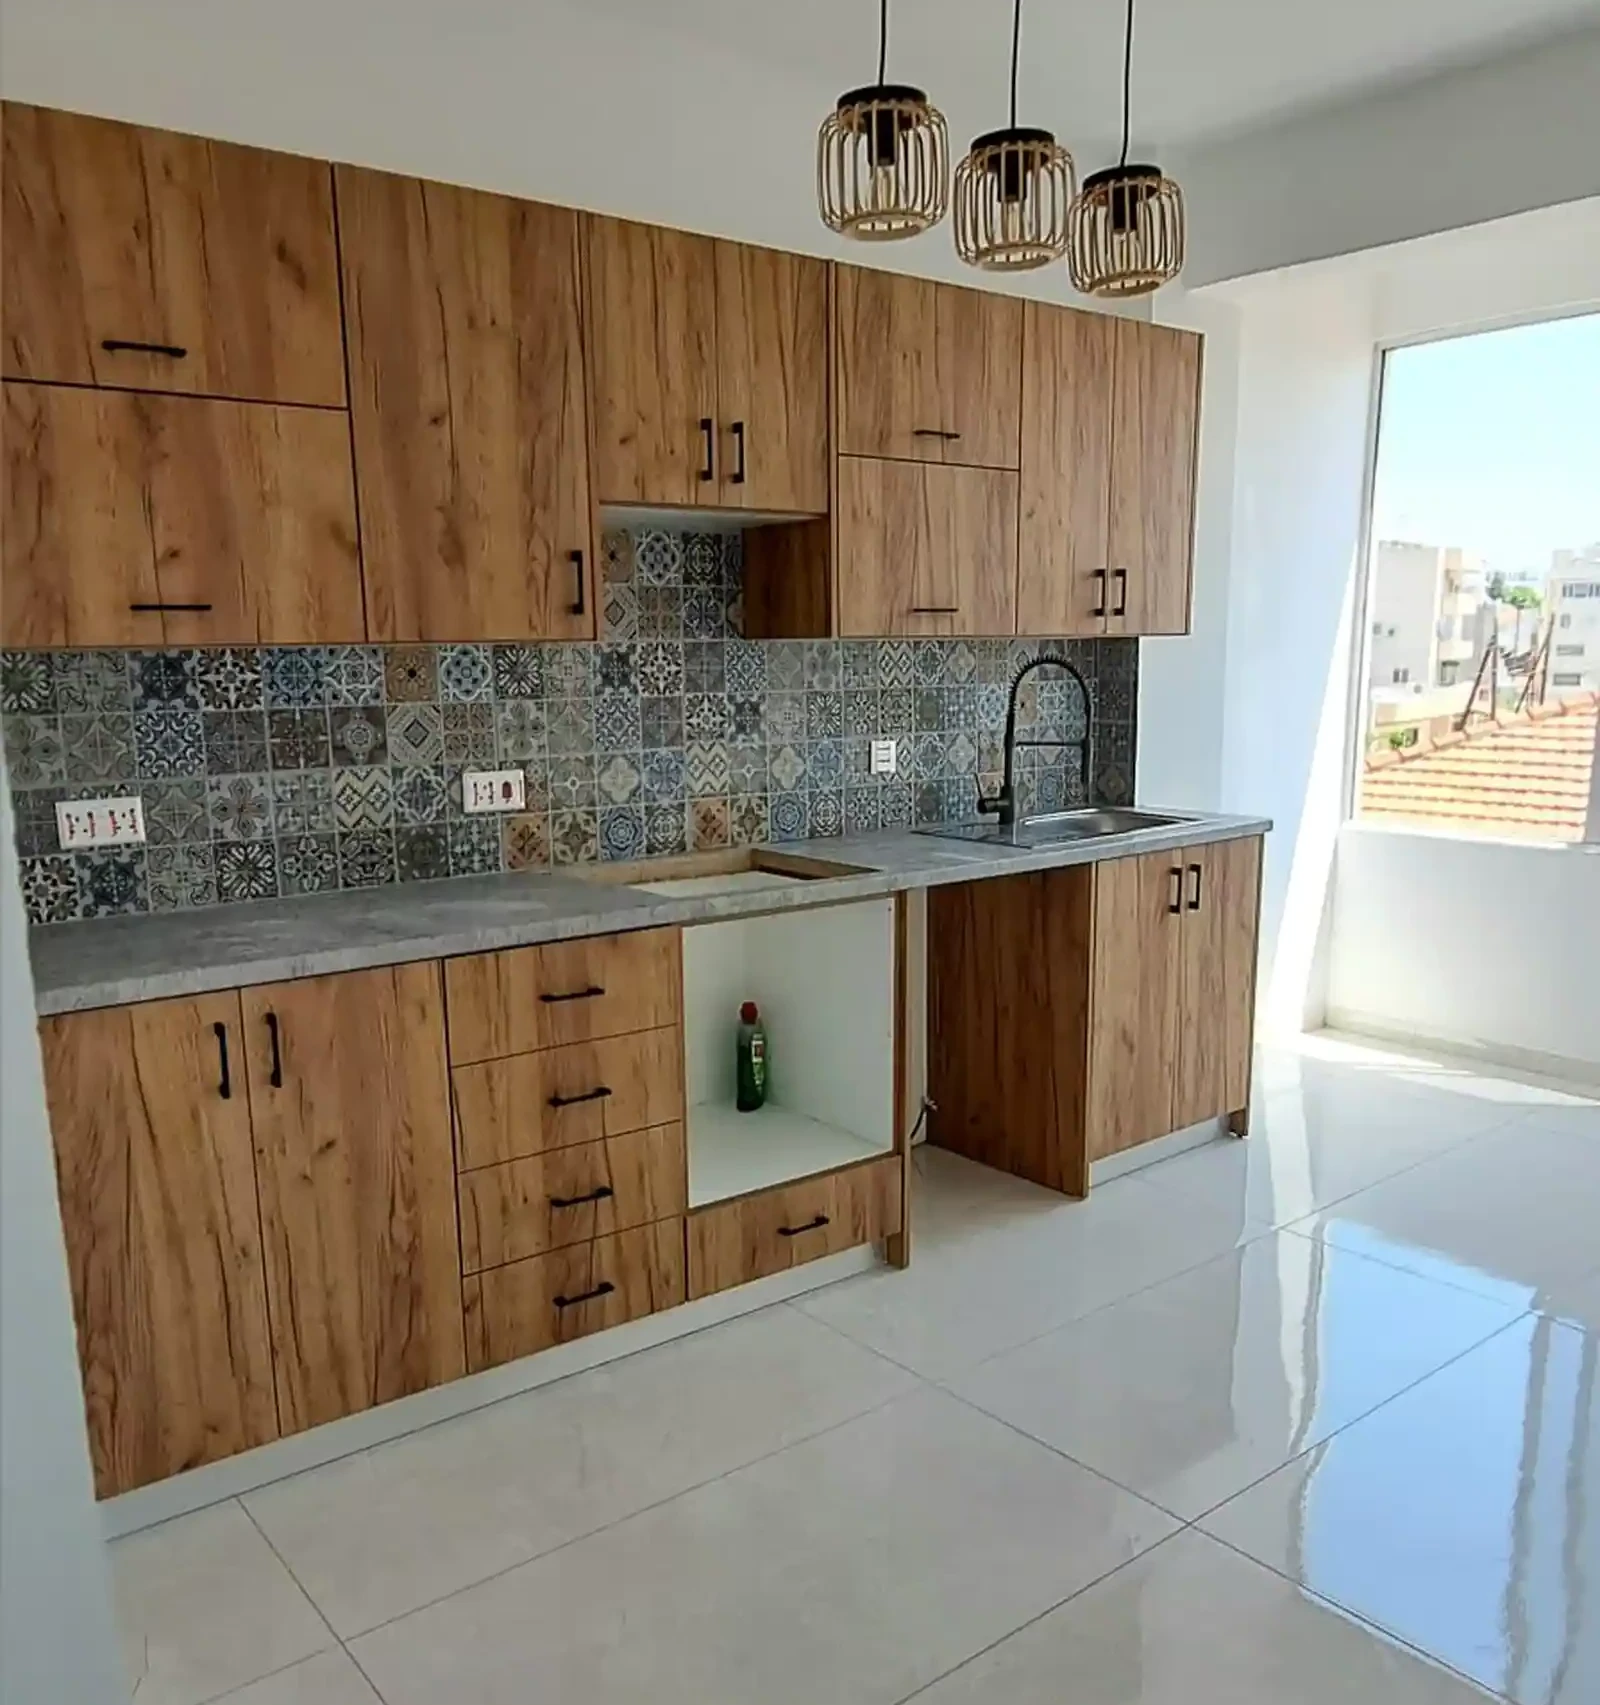 3-bedroom apartment fоr sаle €180.000, image 1